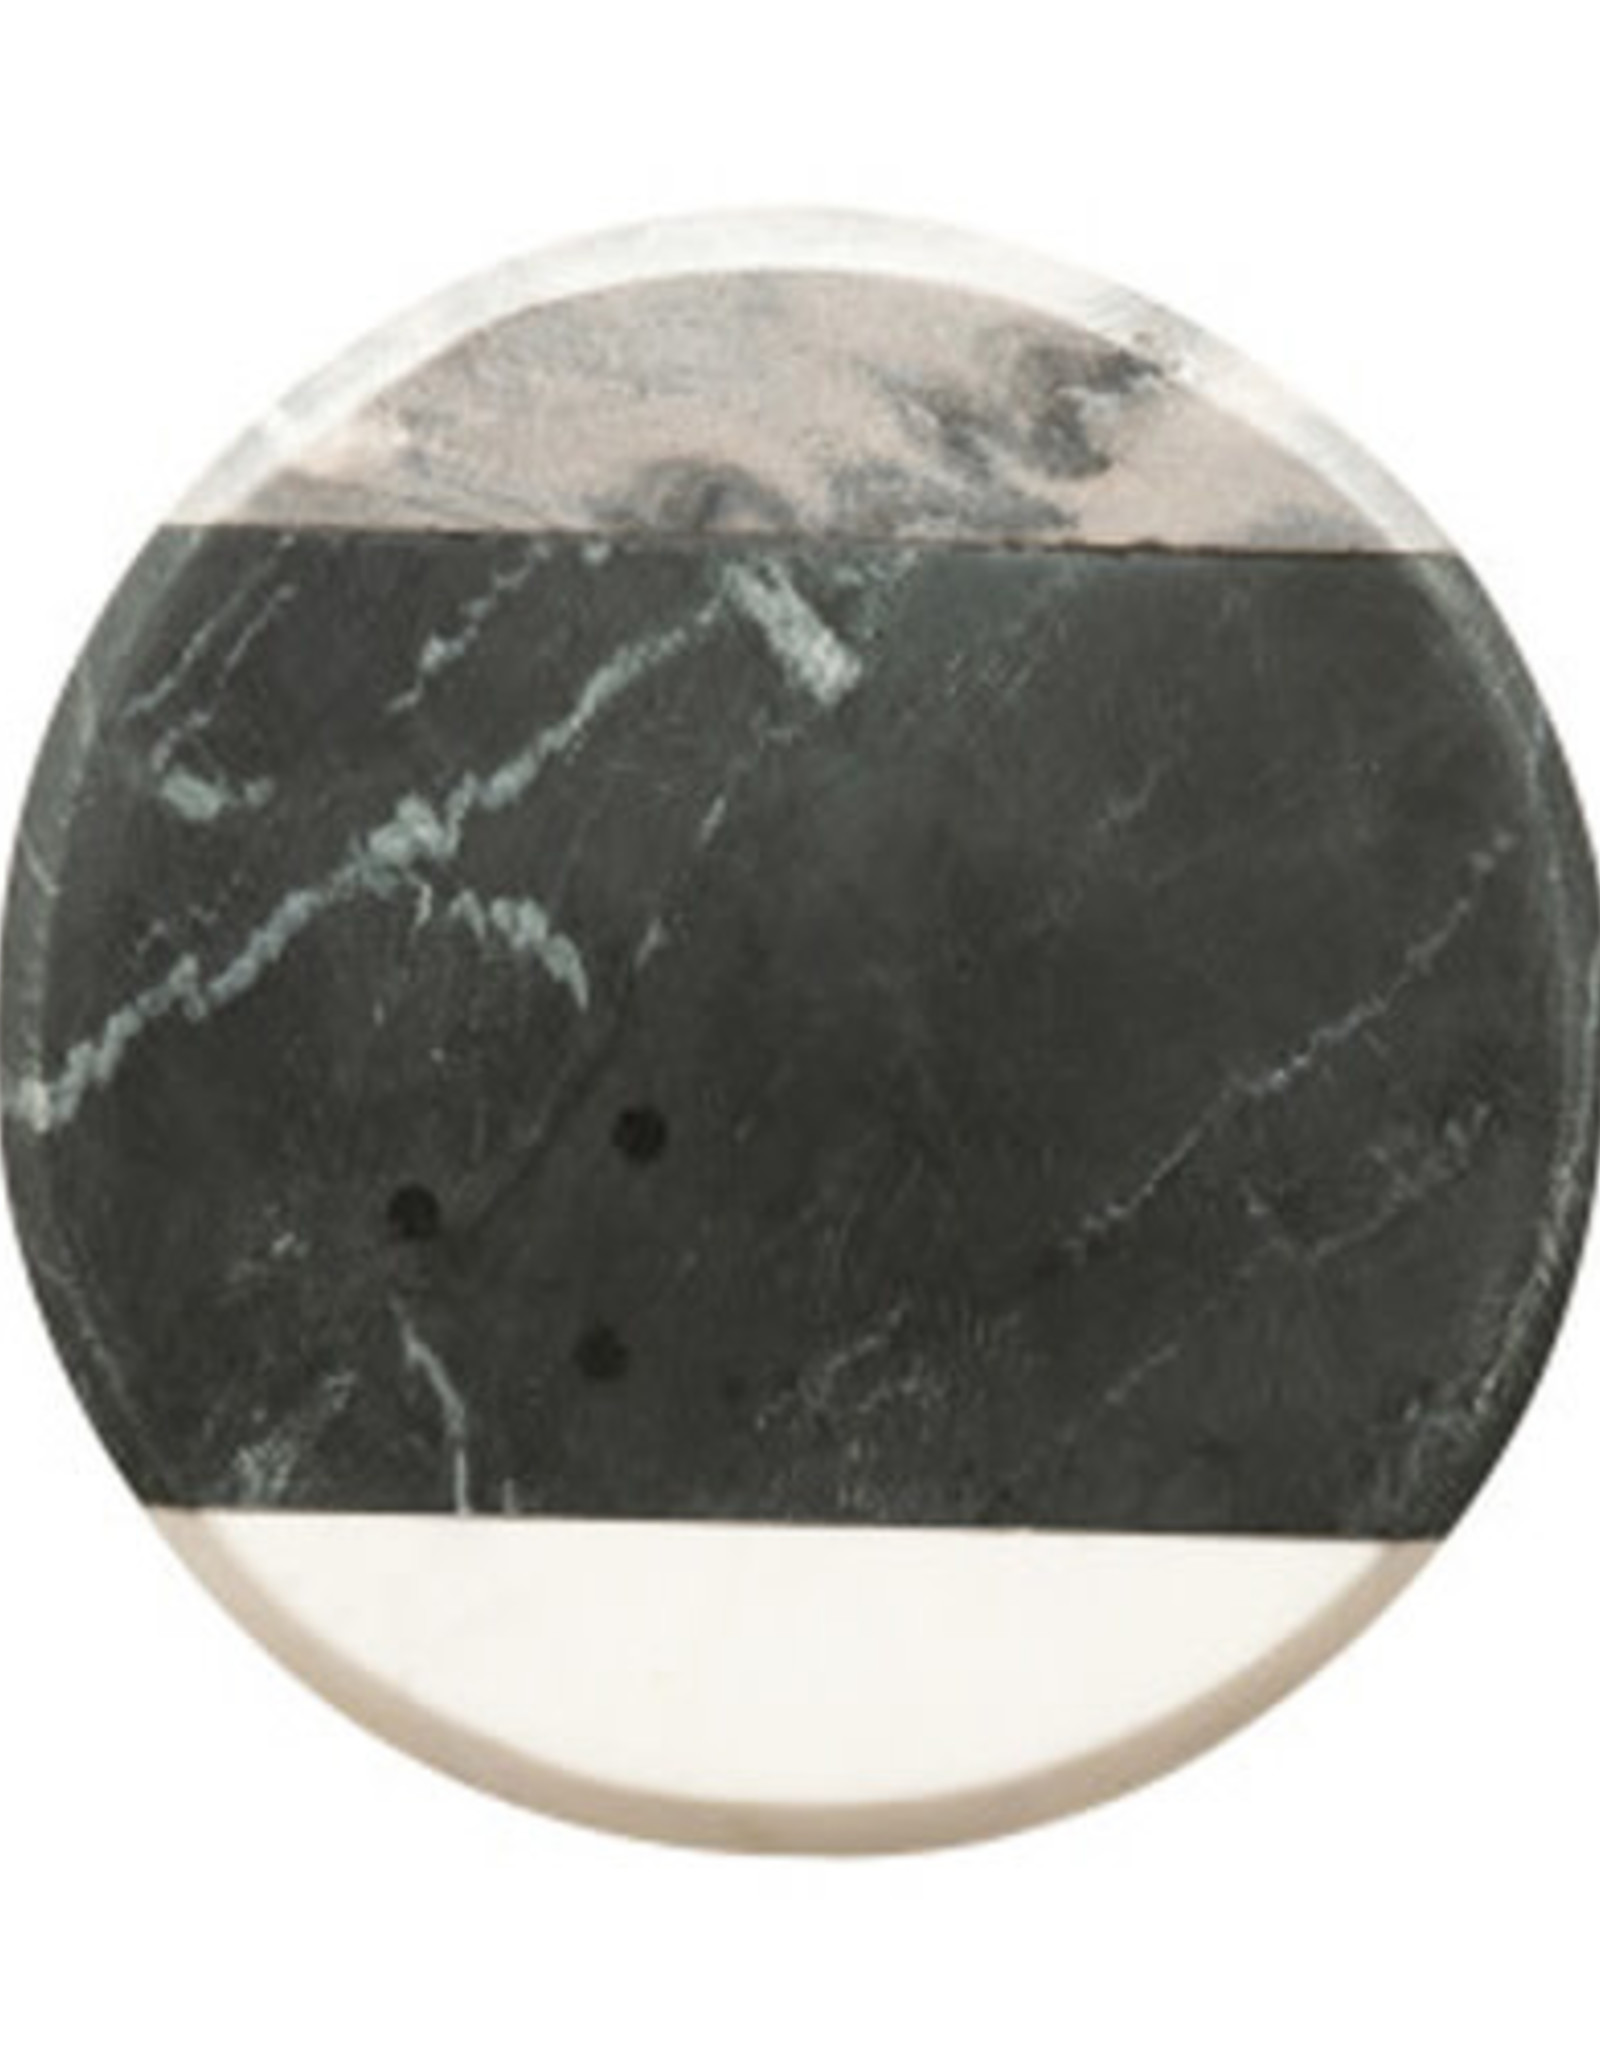 Round Marble Cheese/Cutting Board, Grey, Black & White